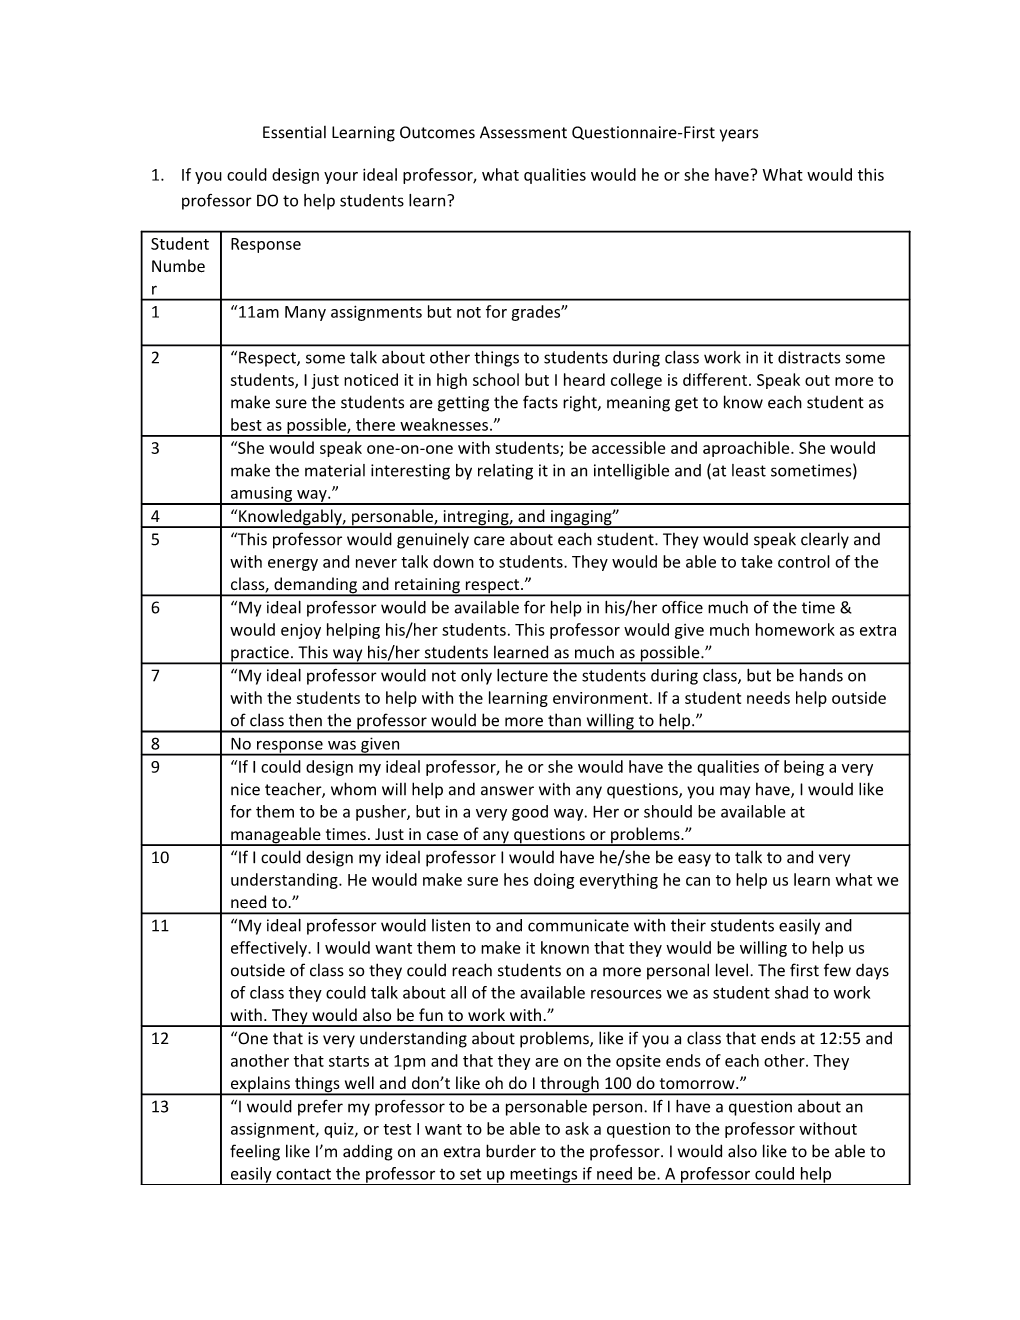 Essential Learning Outcomes Assessment Questionnaire-First Years